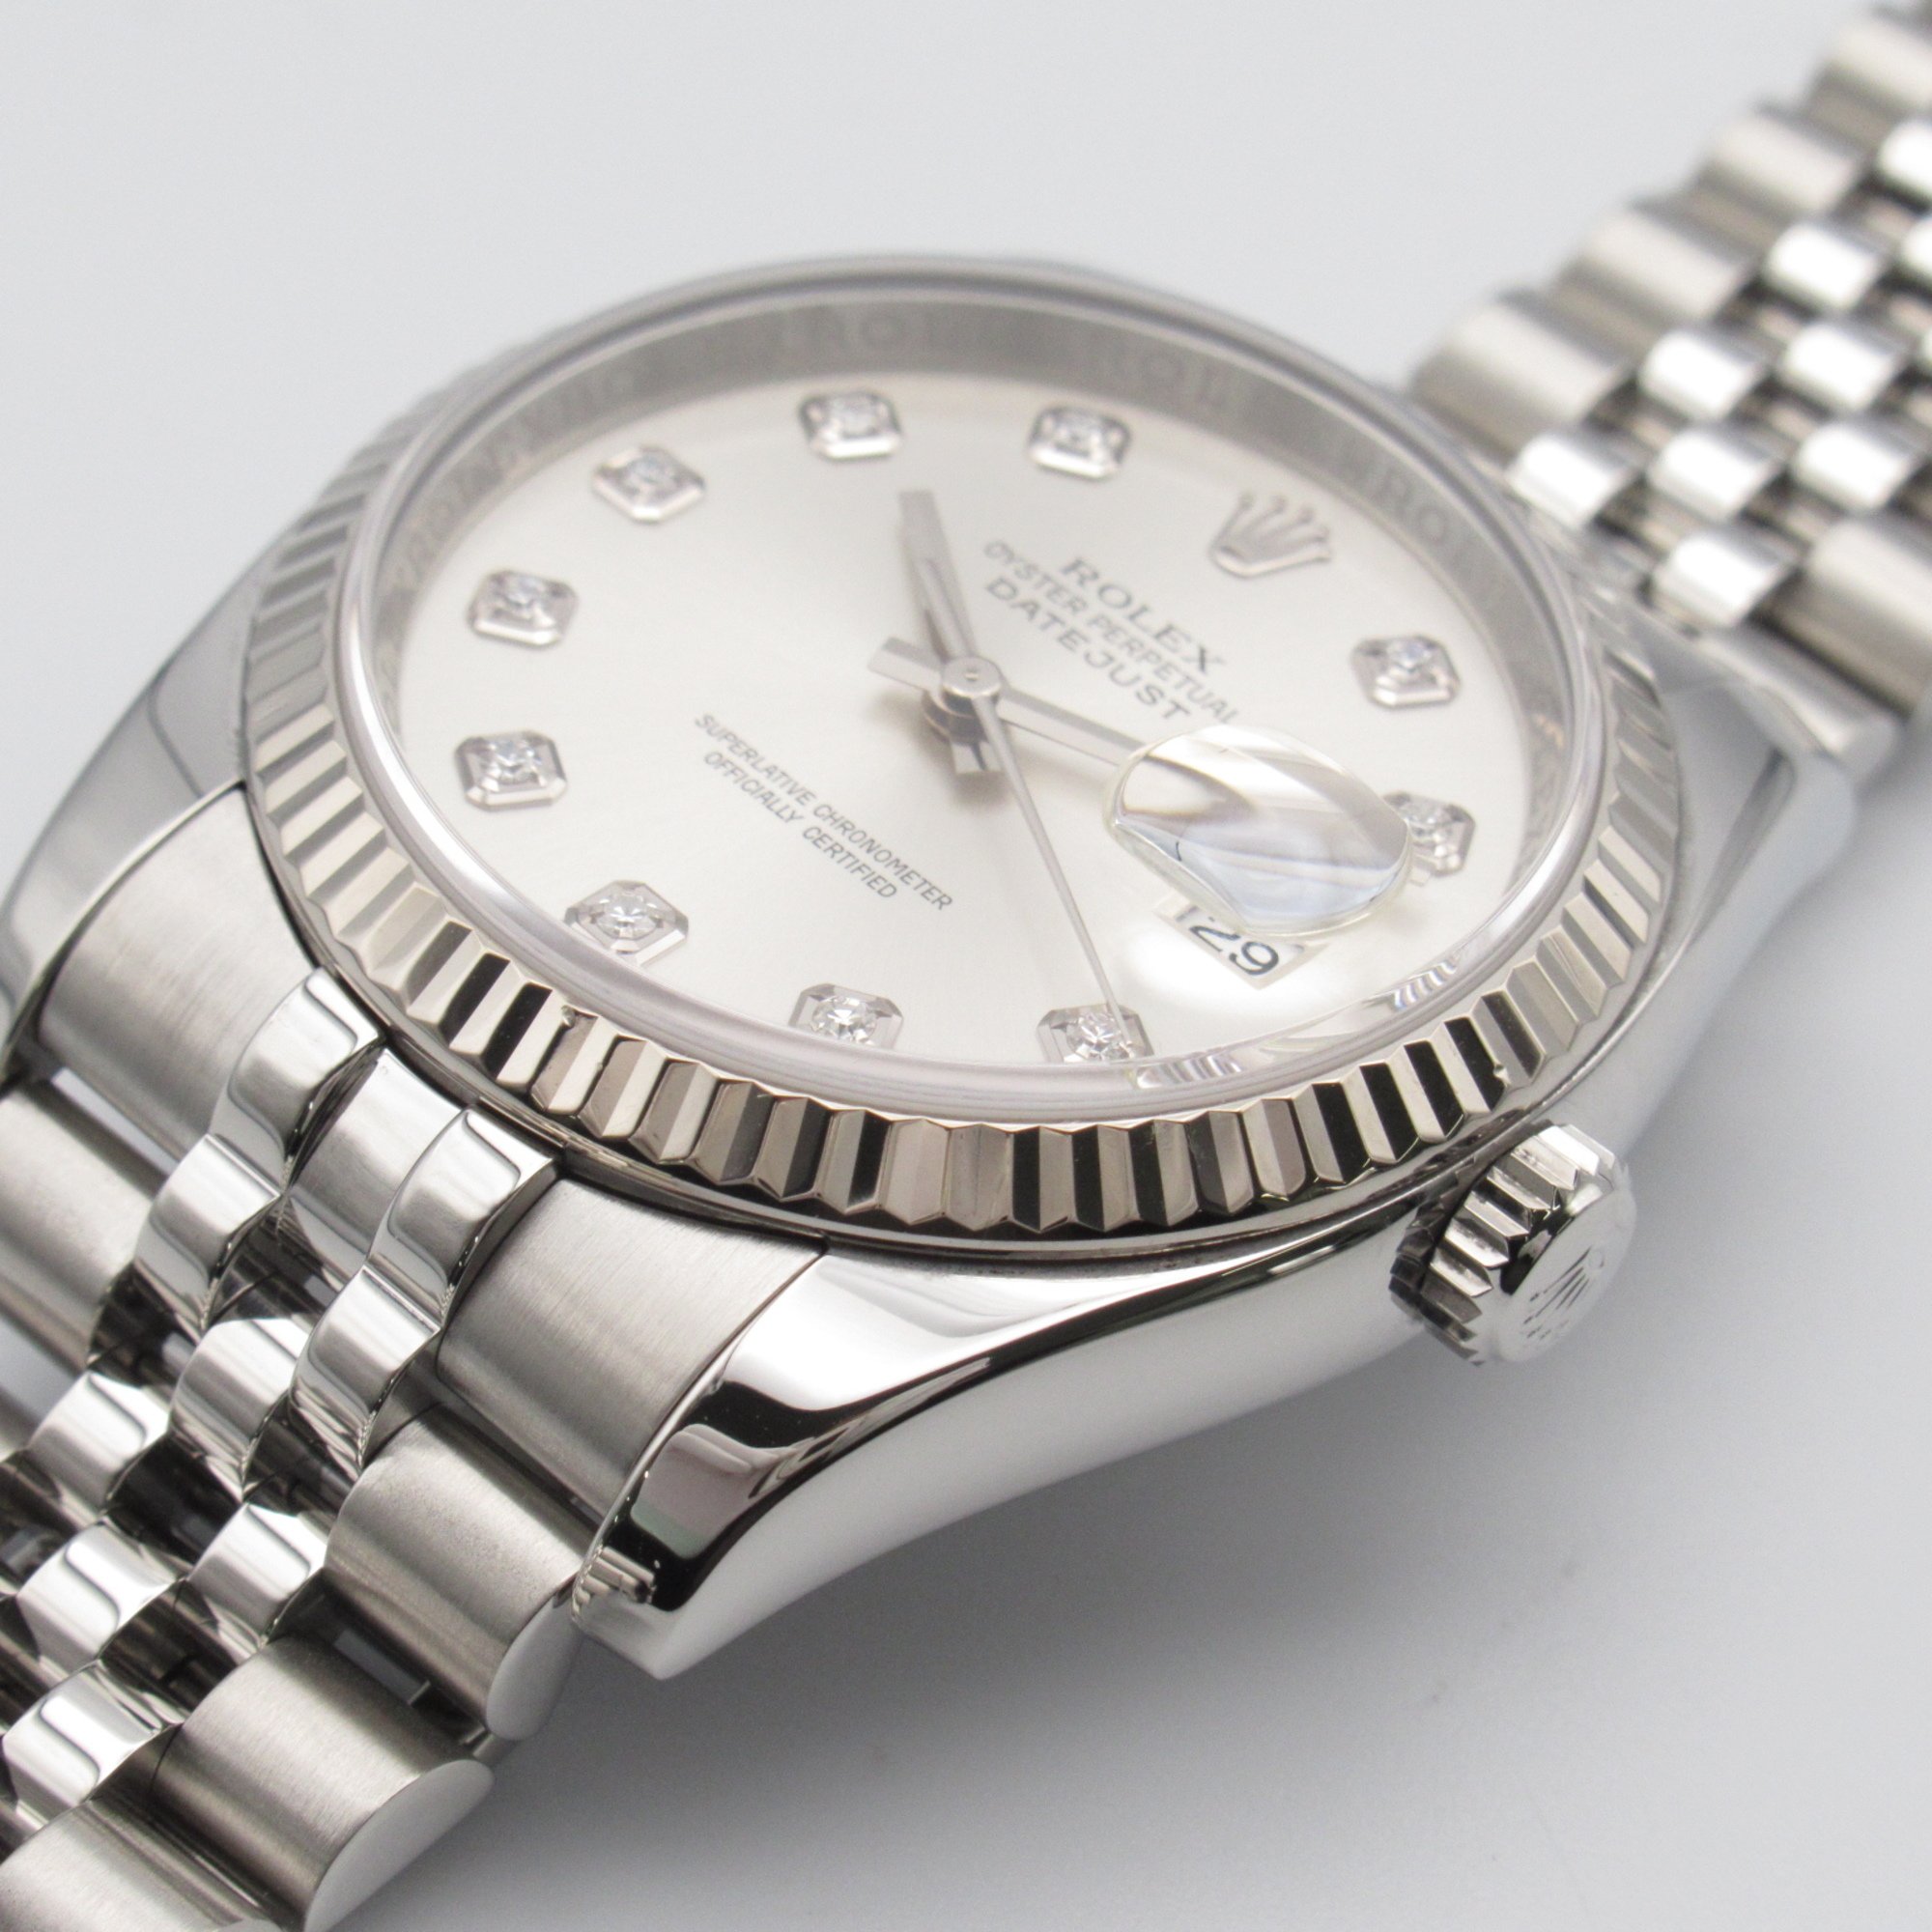 ROLEX Datejust 10P diamond random number Wrist Watch 116234G Mechanical Automatic Silver SIL/NP Stainless Steel WG 116234G